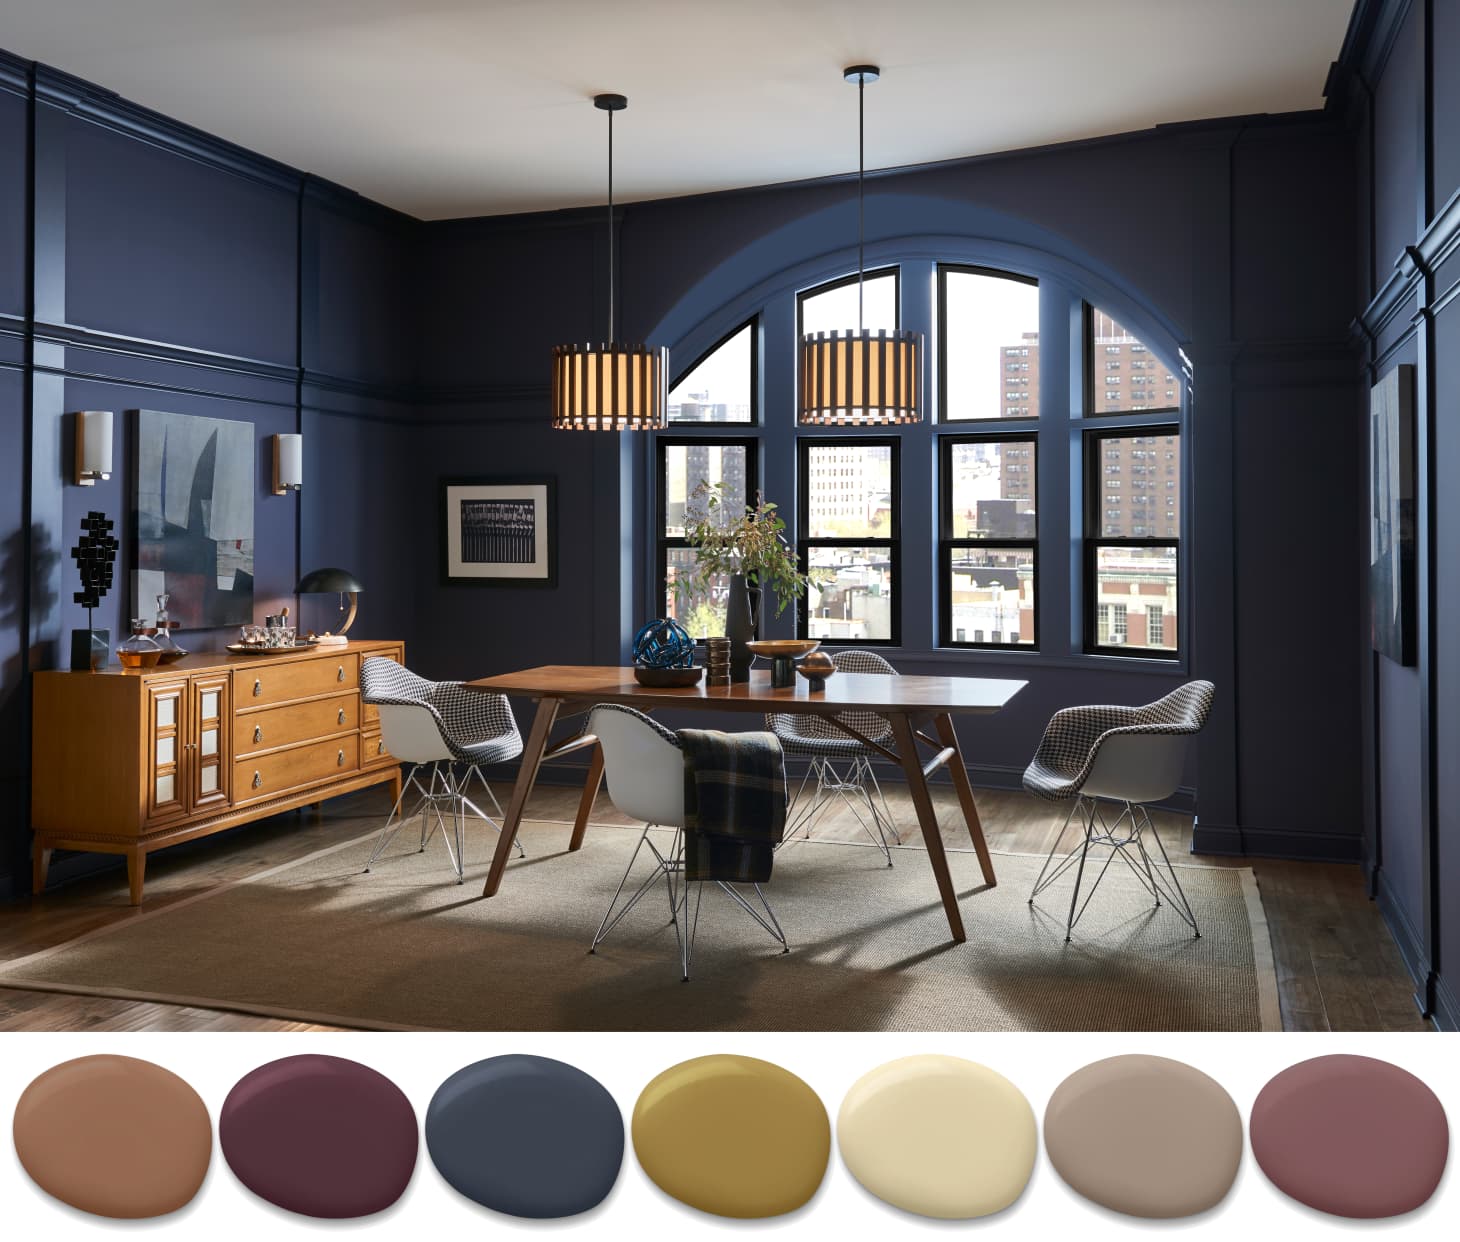 Five Paint Trends for 2019 - Pottery Barn | Bedroom color 